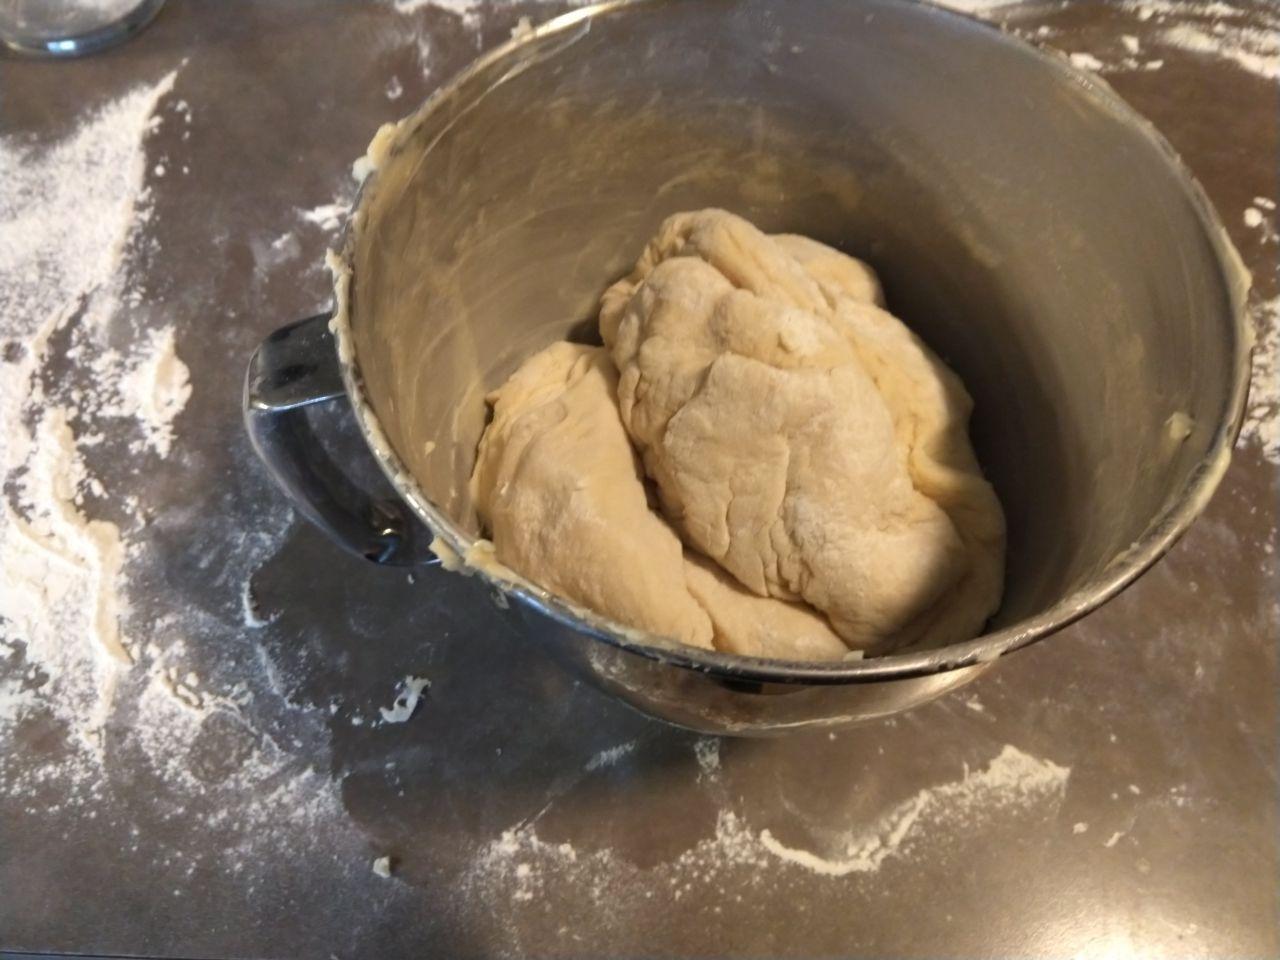 Dough in a greased mixing bowl after kneading, ready to rise.